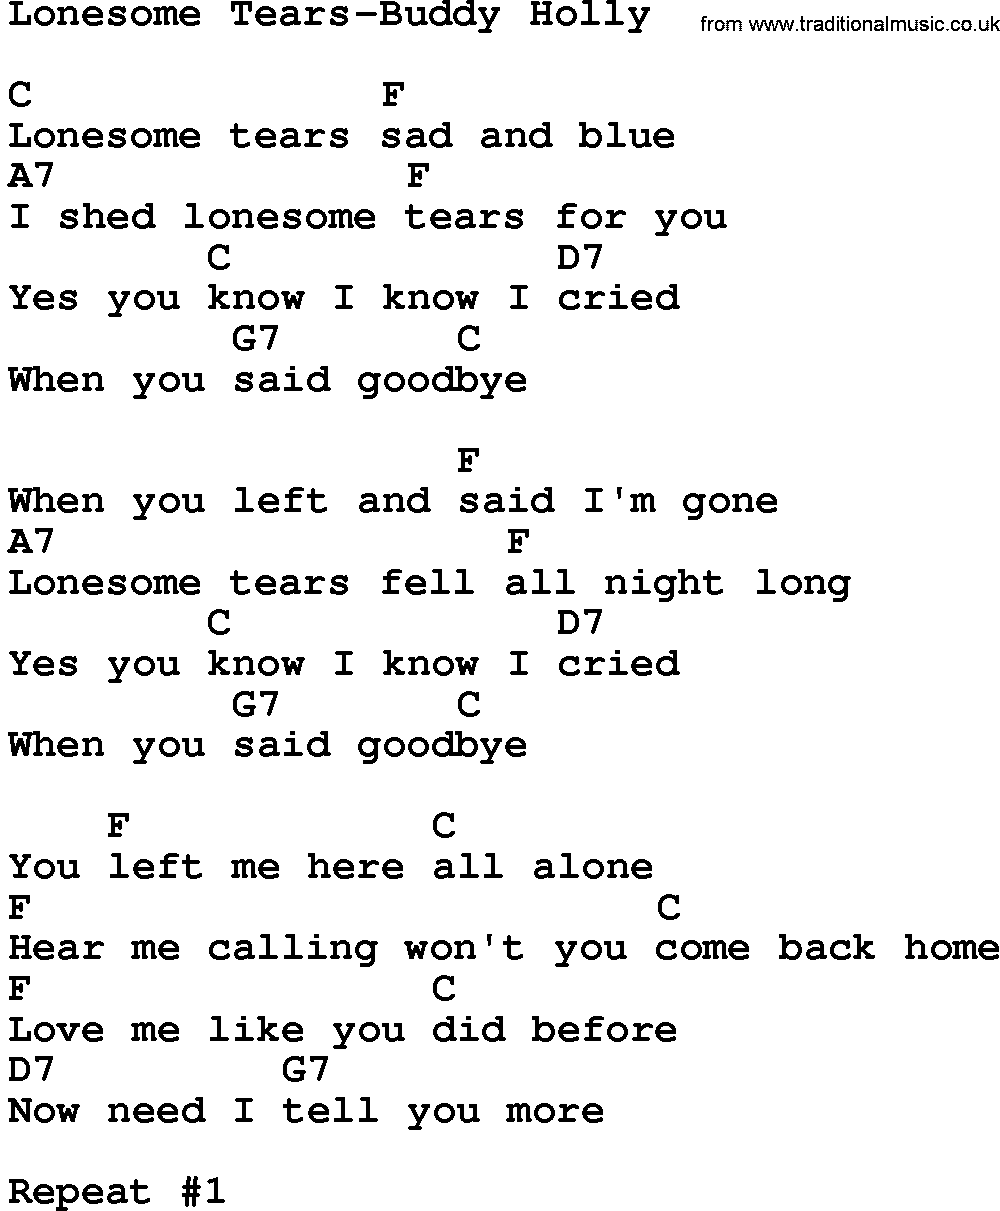 Country music song: Lonesome Tears-Buddy Holly lyrics and chords